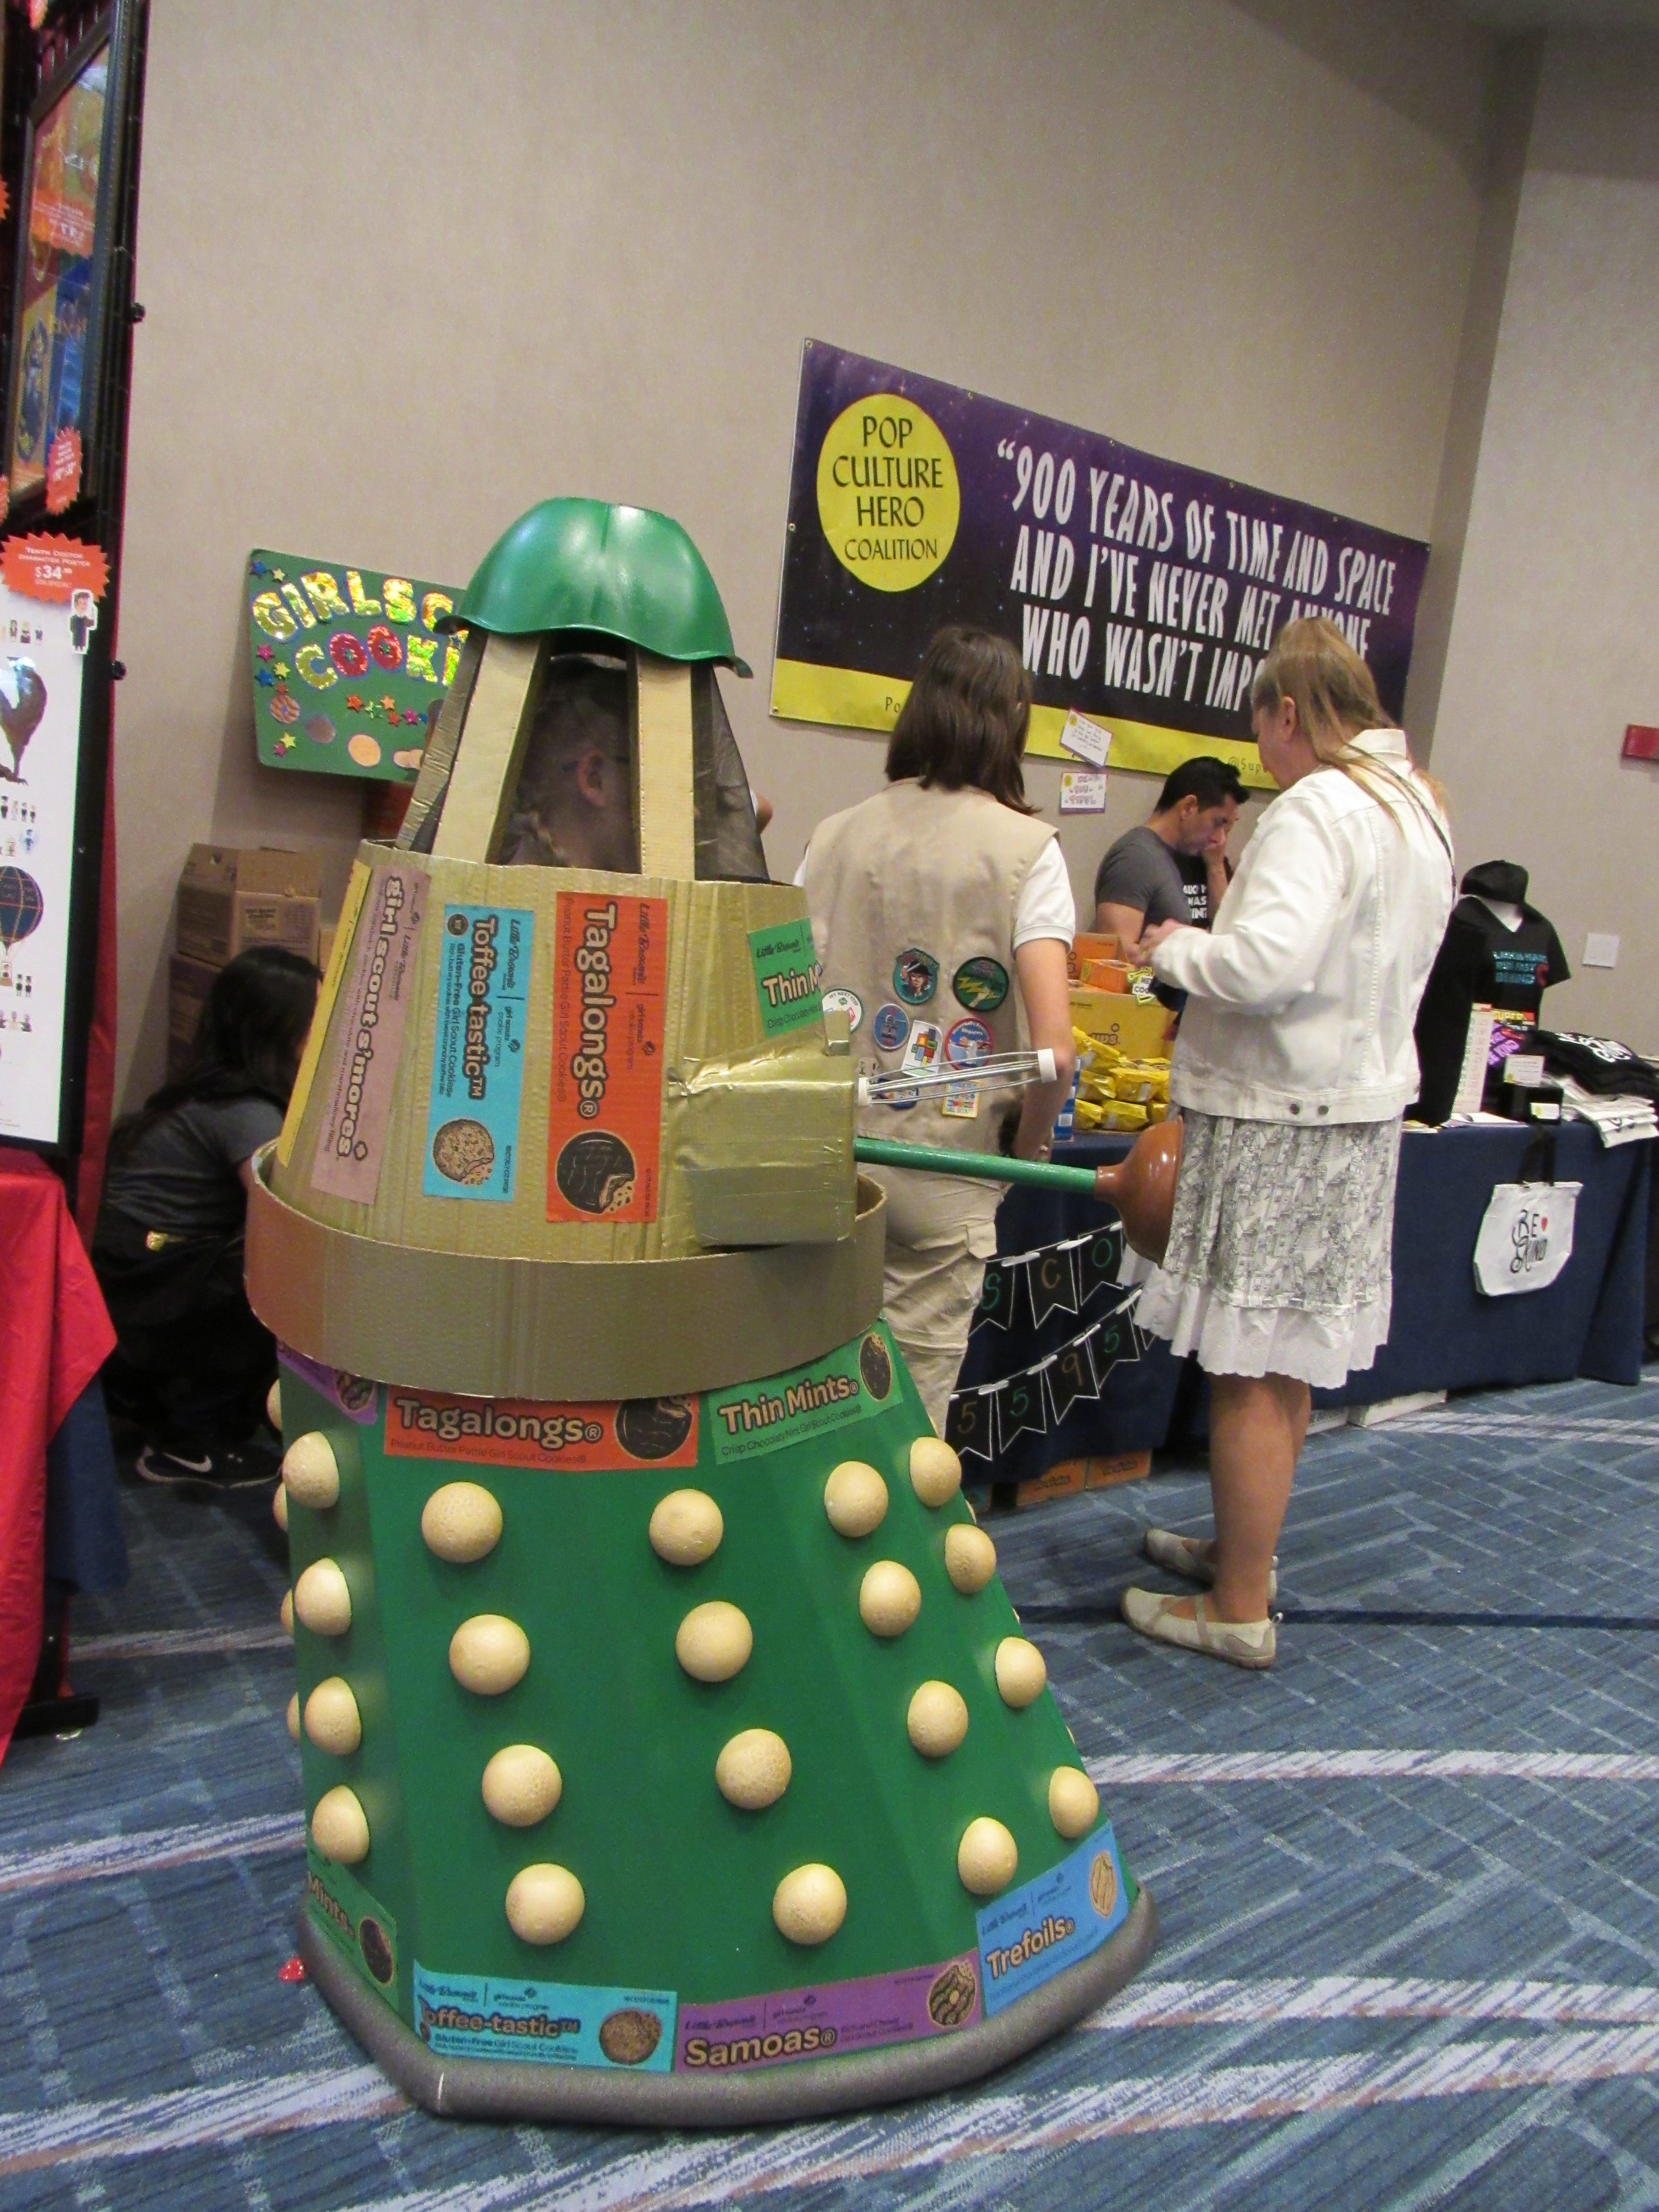 Dealers Room at Gallifrey One 2020